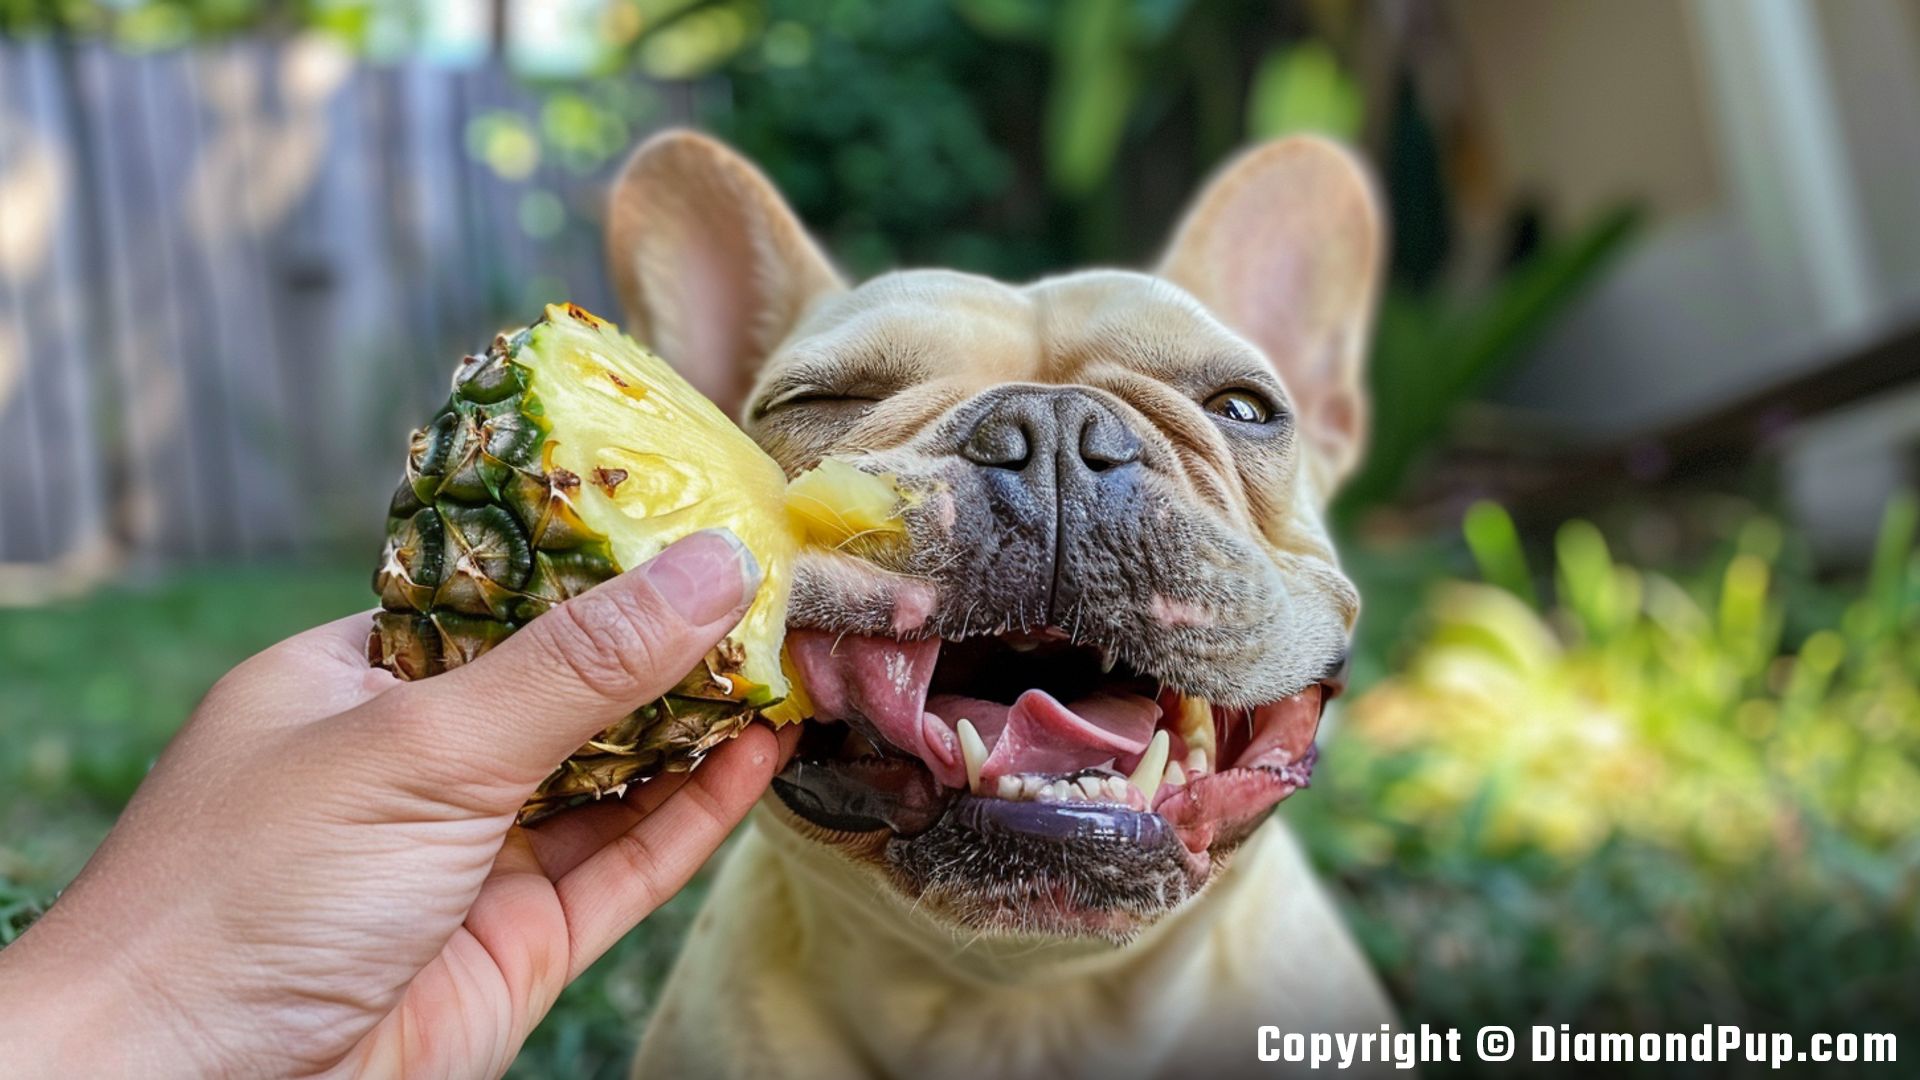 Image of a Playful French Bulldog Snacking on Pineapple